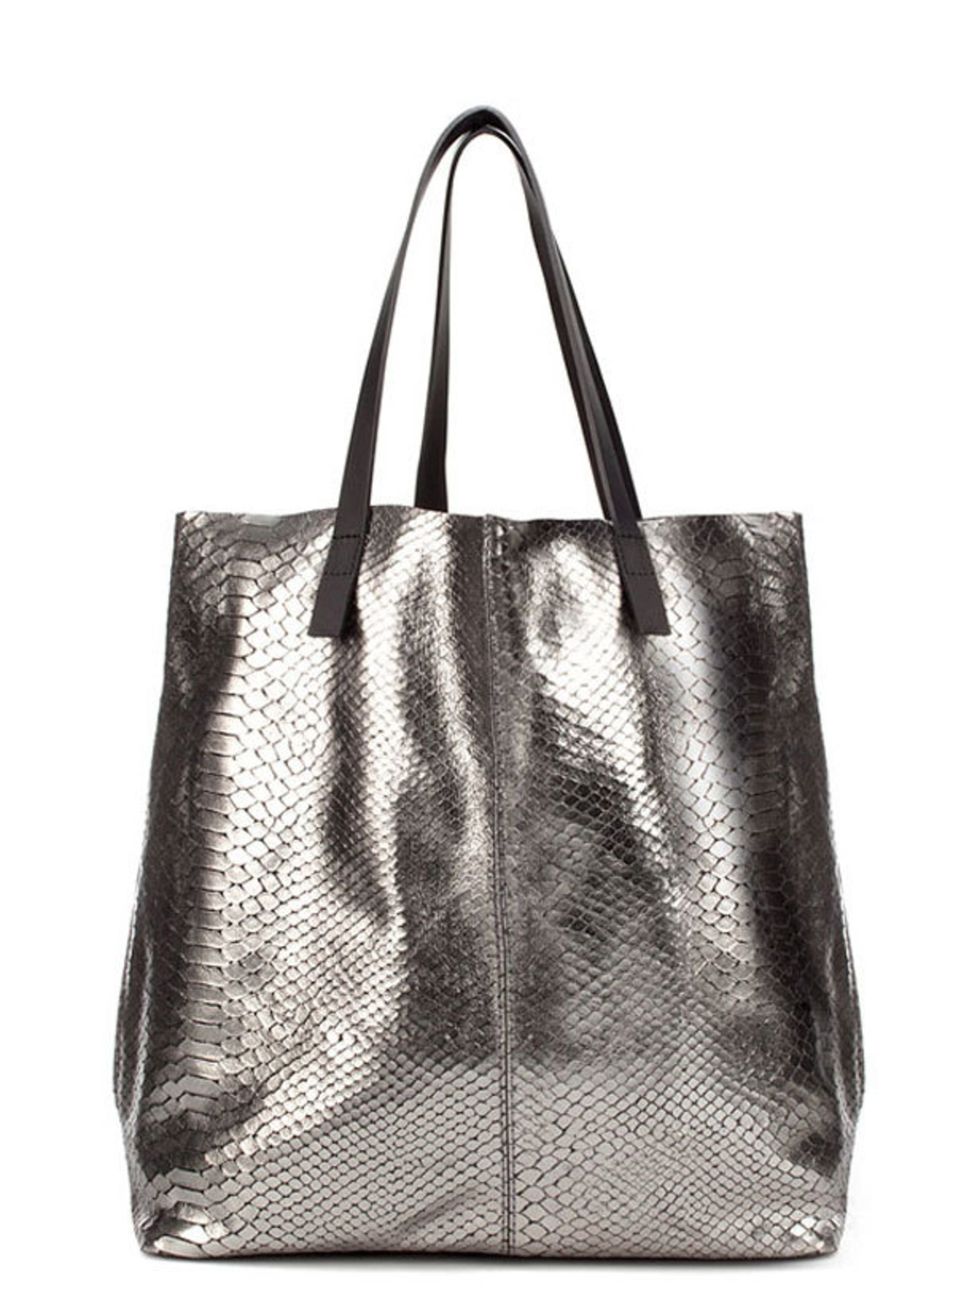 <p>Who knew metallic snakeskin could look so cool? Work this Zara tote with dark denim and leather for a downtown NY vibe <a href="http://www.zara.com/webapp/wcs/stores/servlet/product/uk/en/zara-W2011/118156/563004/METALLIC%2BSNAKESKIN%2BSHOPPER">Zara</